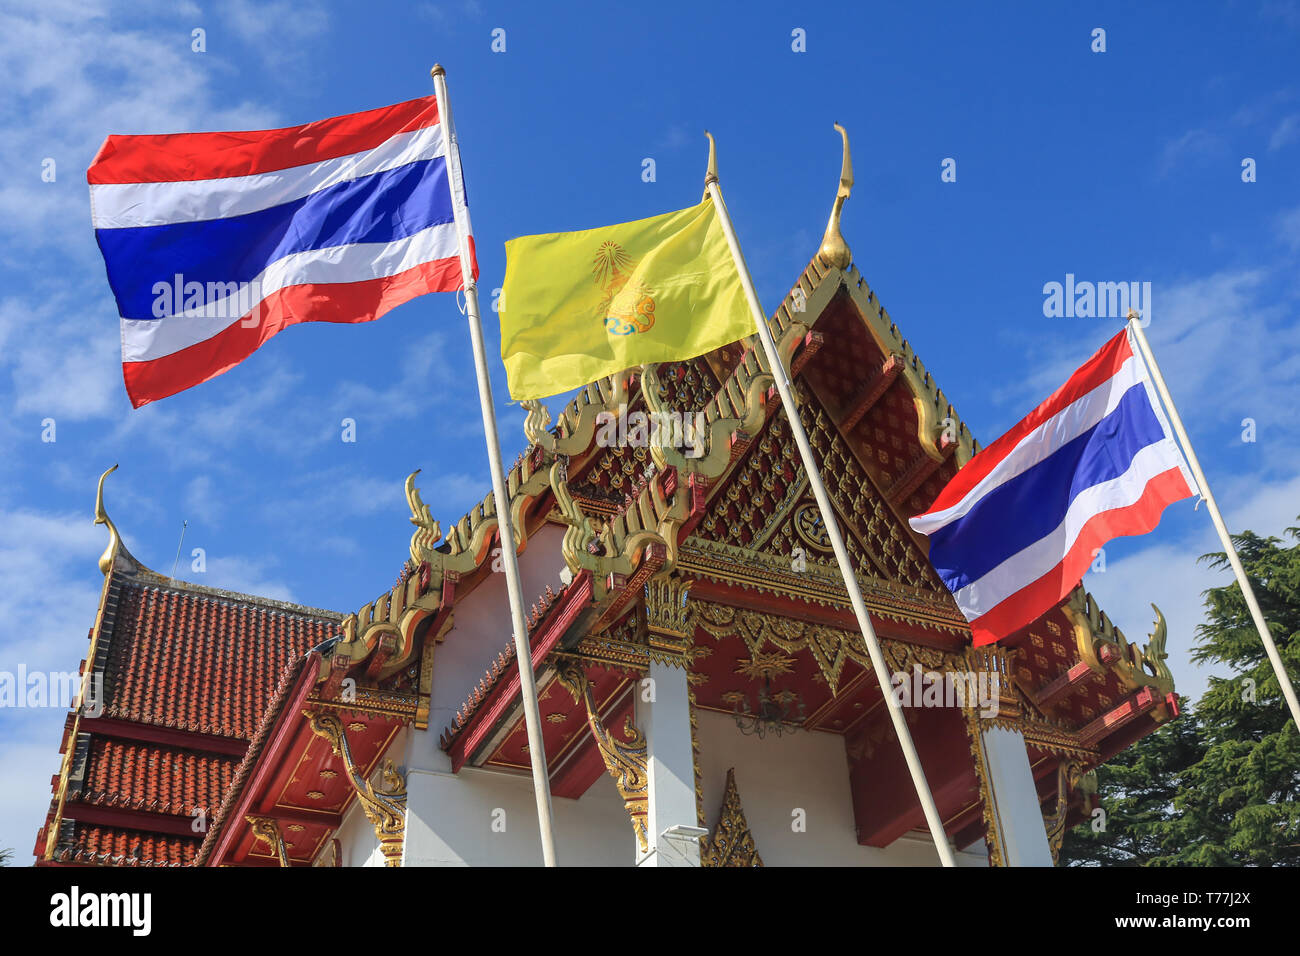 London, UK. 5th May 2019. Thailand national flags and royal colours are flown at the Wat Buddhapadipa Buddhist temple in Wimbledon to celebrate the coronation of  66 year old King Rama X Maha Vajiralongkorn of Thailand Credit: amer ghazzal/Alamy Live News Stock Photo